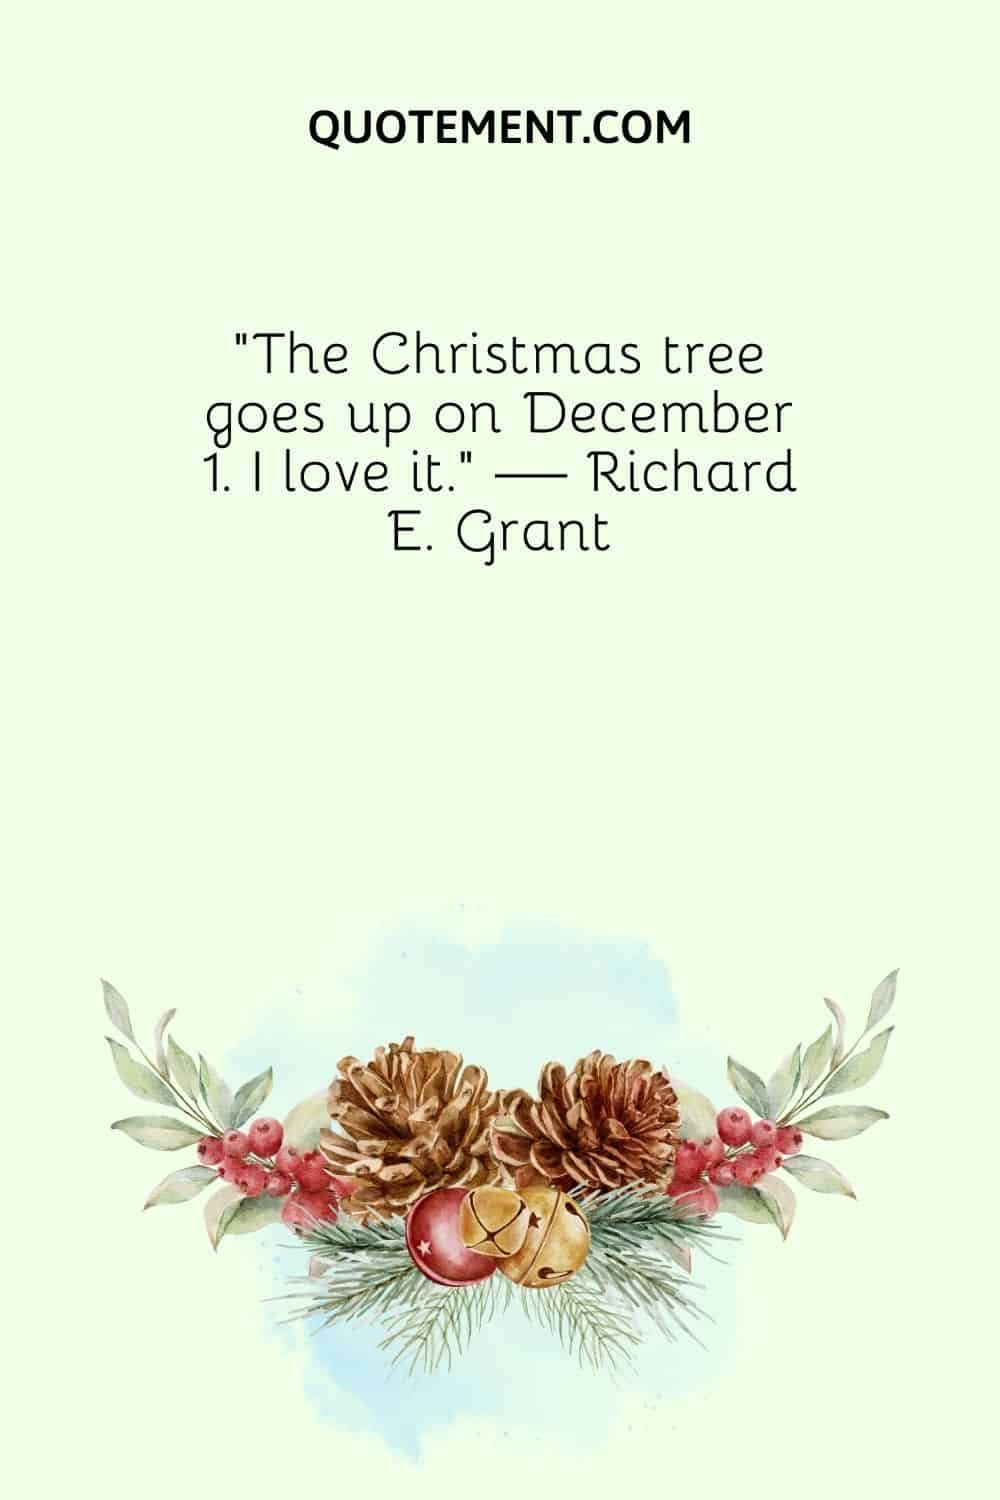 Christmas ornaments image representing short December 1st quote